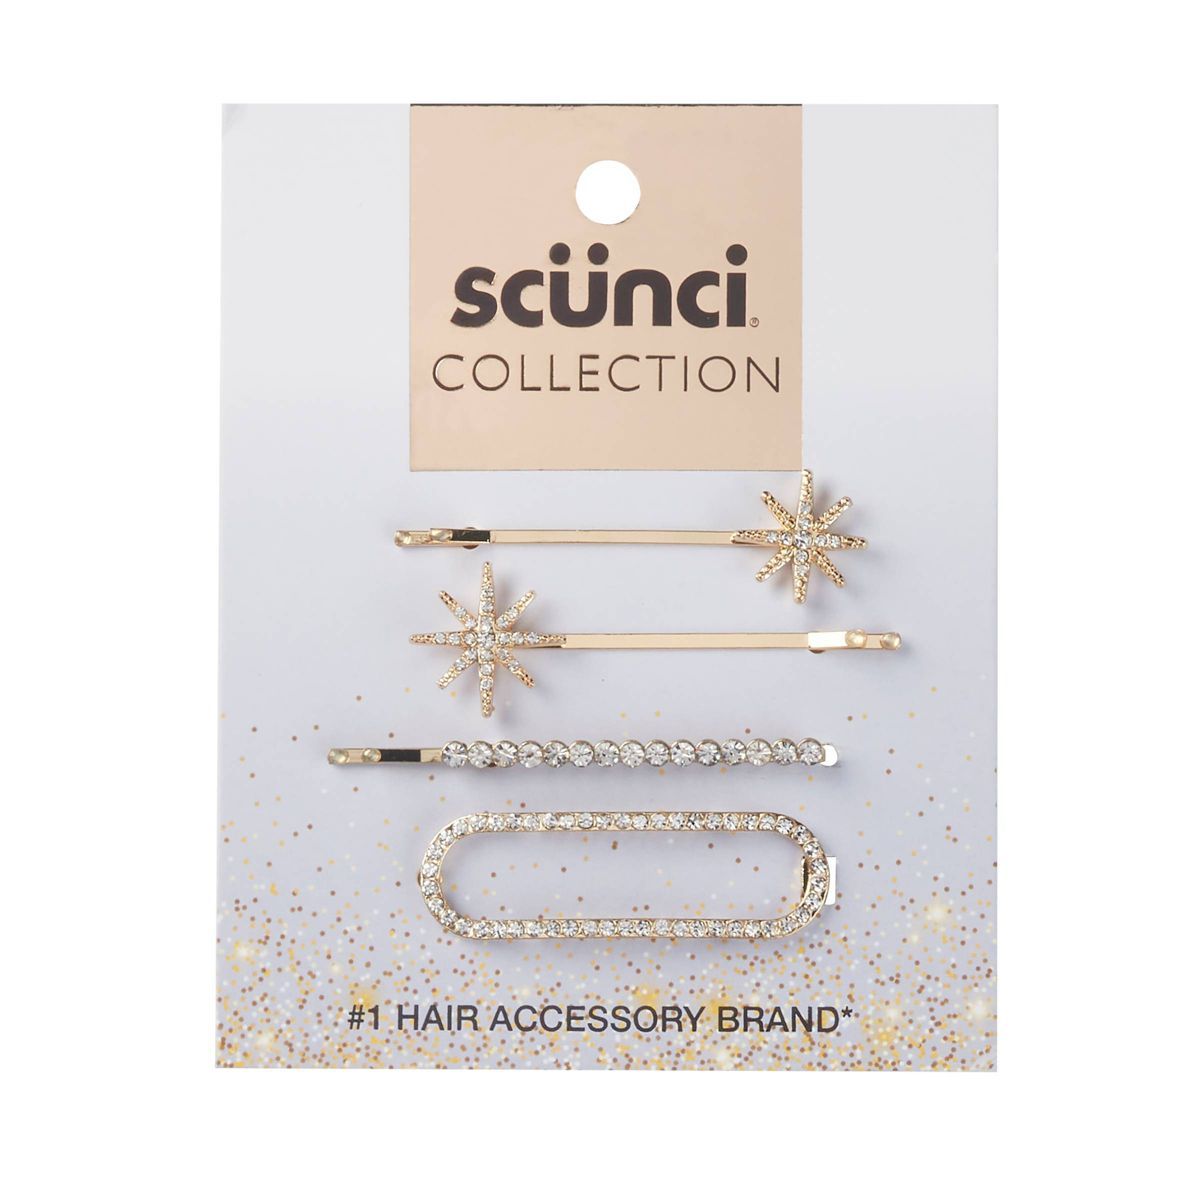 scunci Collection Embellished Bobby Pins - 4ct | Target